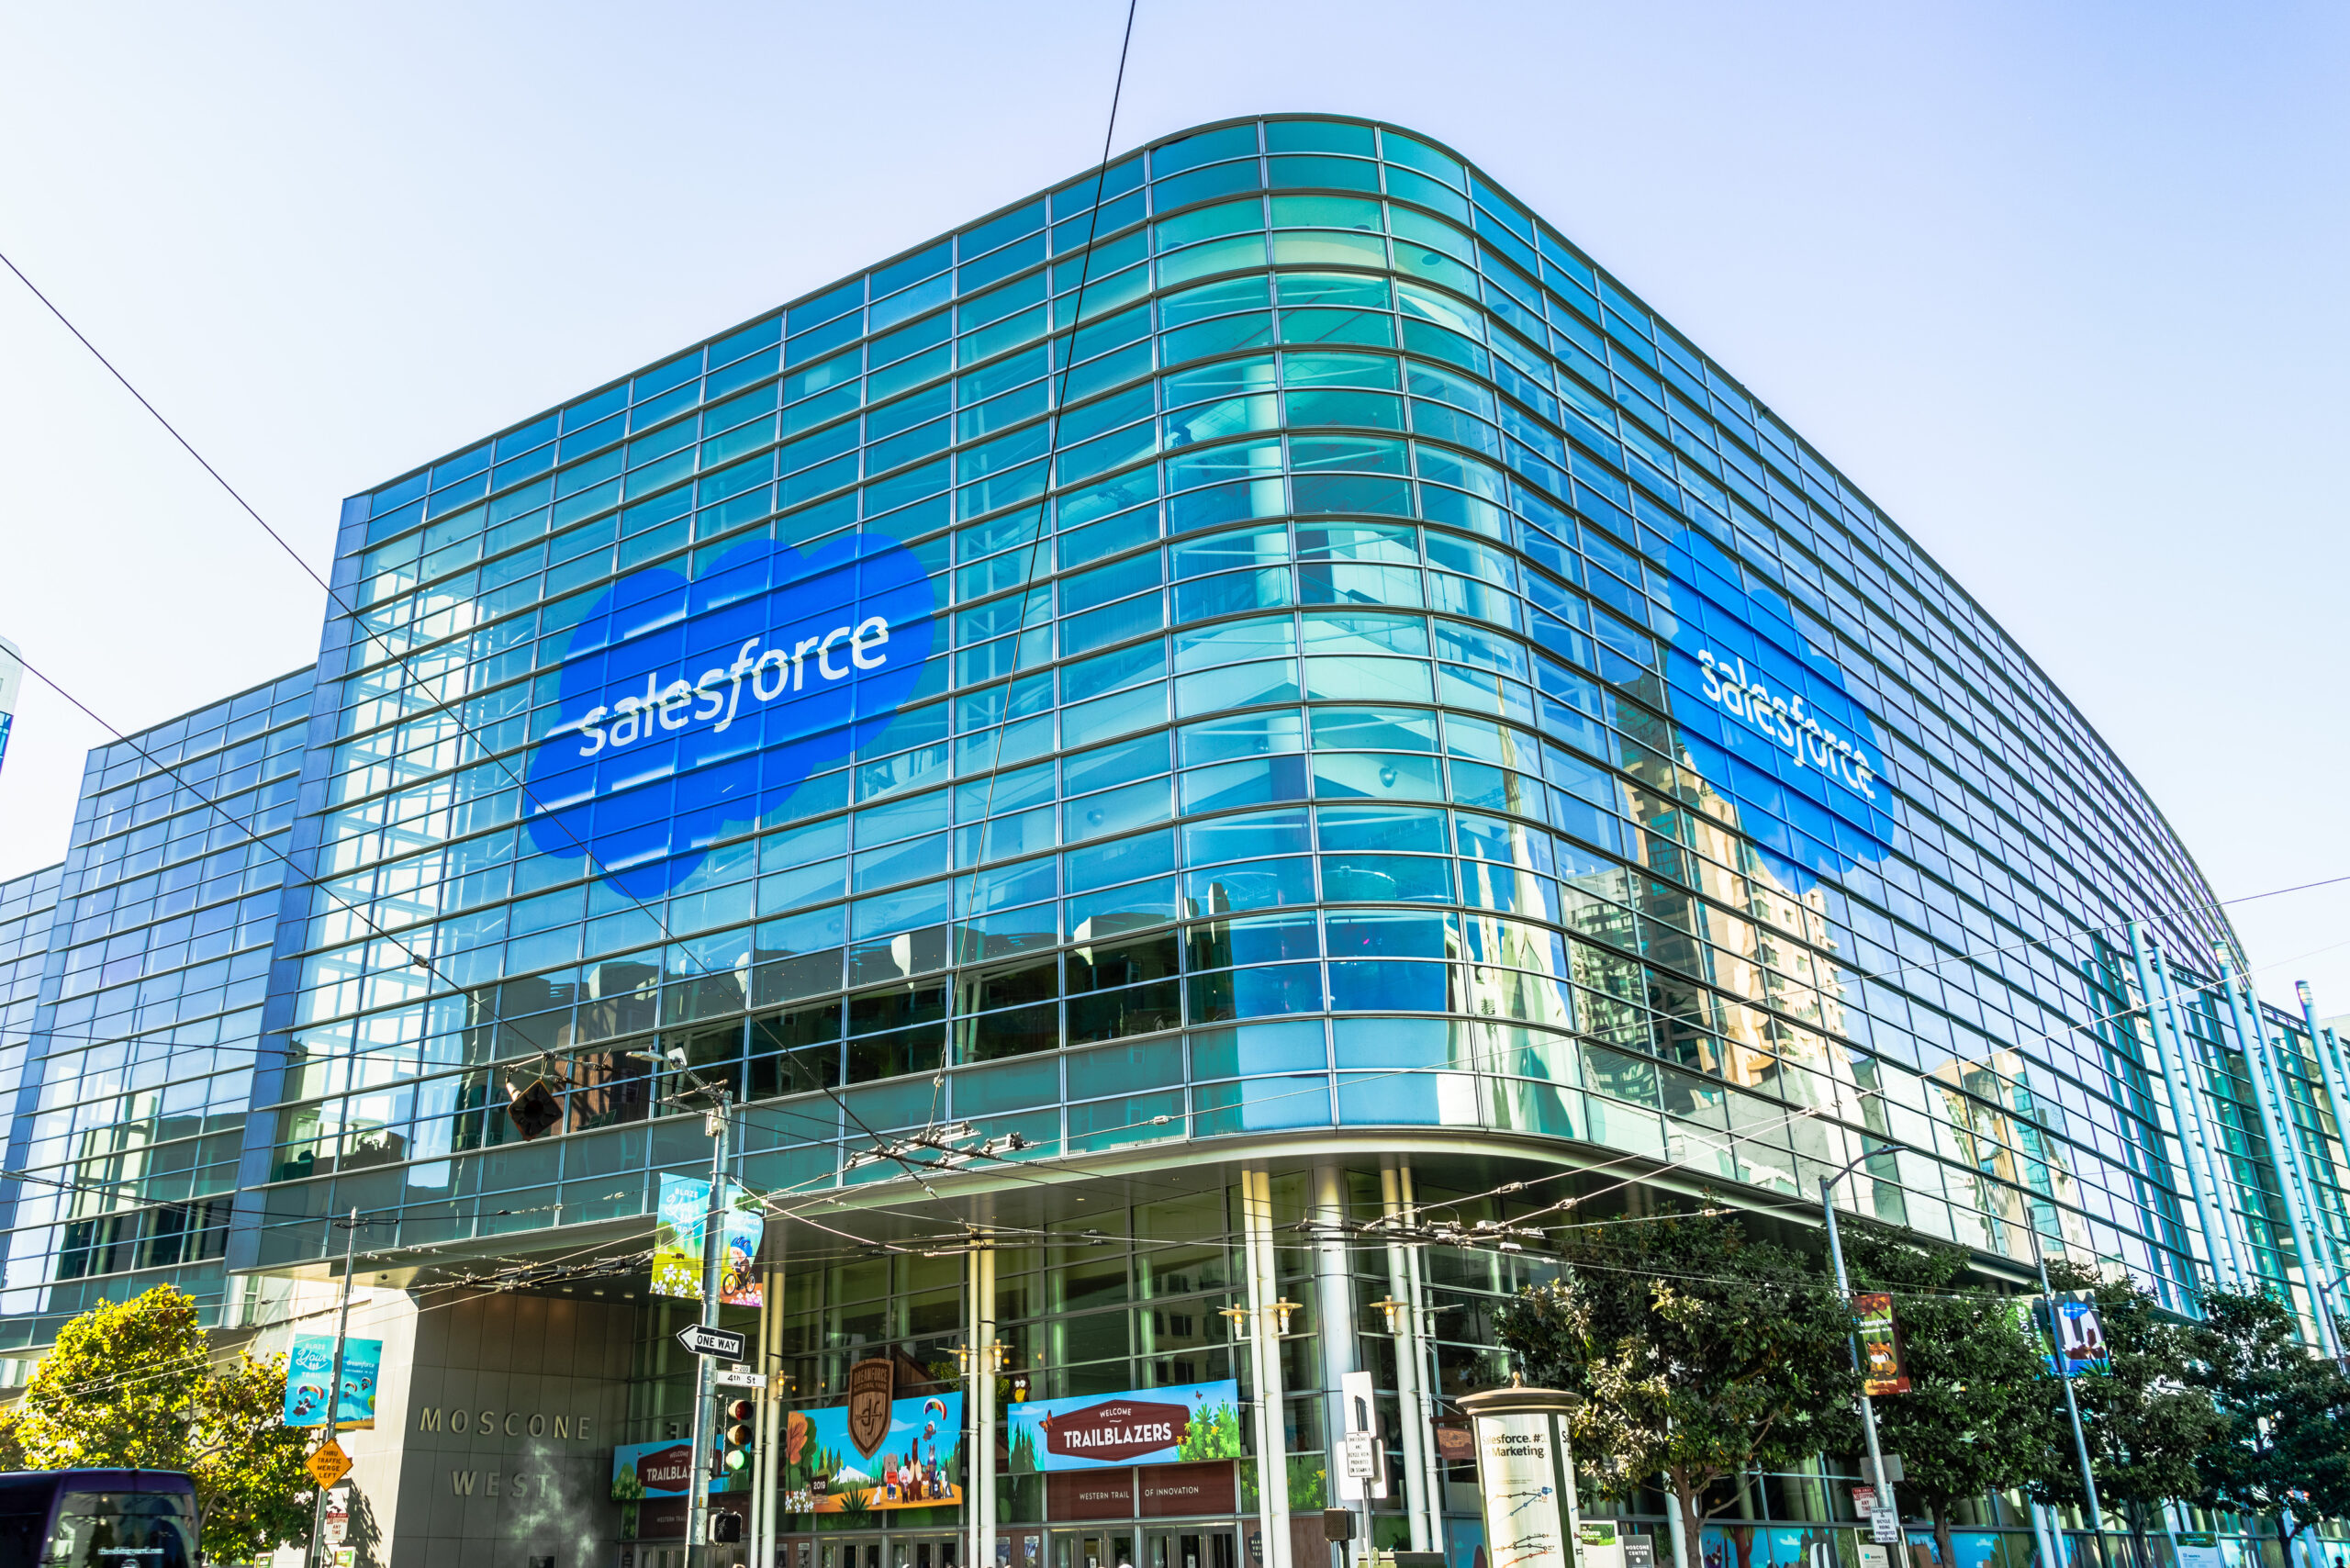 A fully windowed office building, the Moscone Center in San Francisco. The Salesforce logo is on two sides.